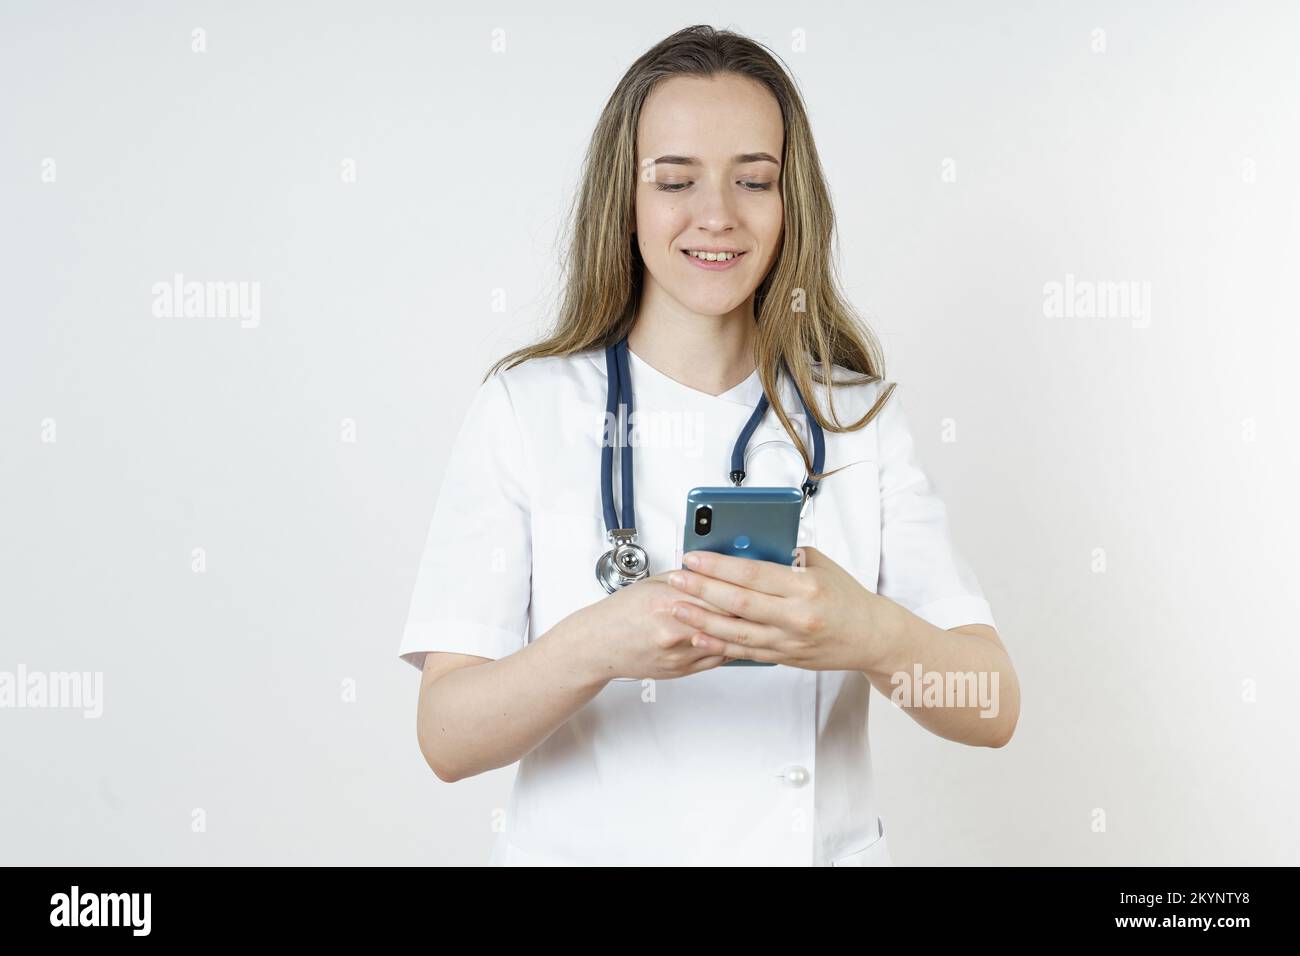 Medicine and health concept. Young woman doctor message in mobile phone. Isolated on white background. Stock Photo